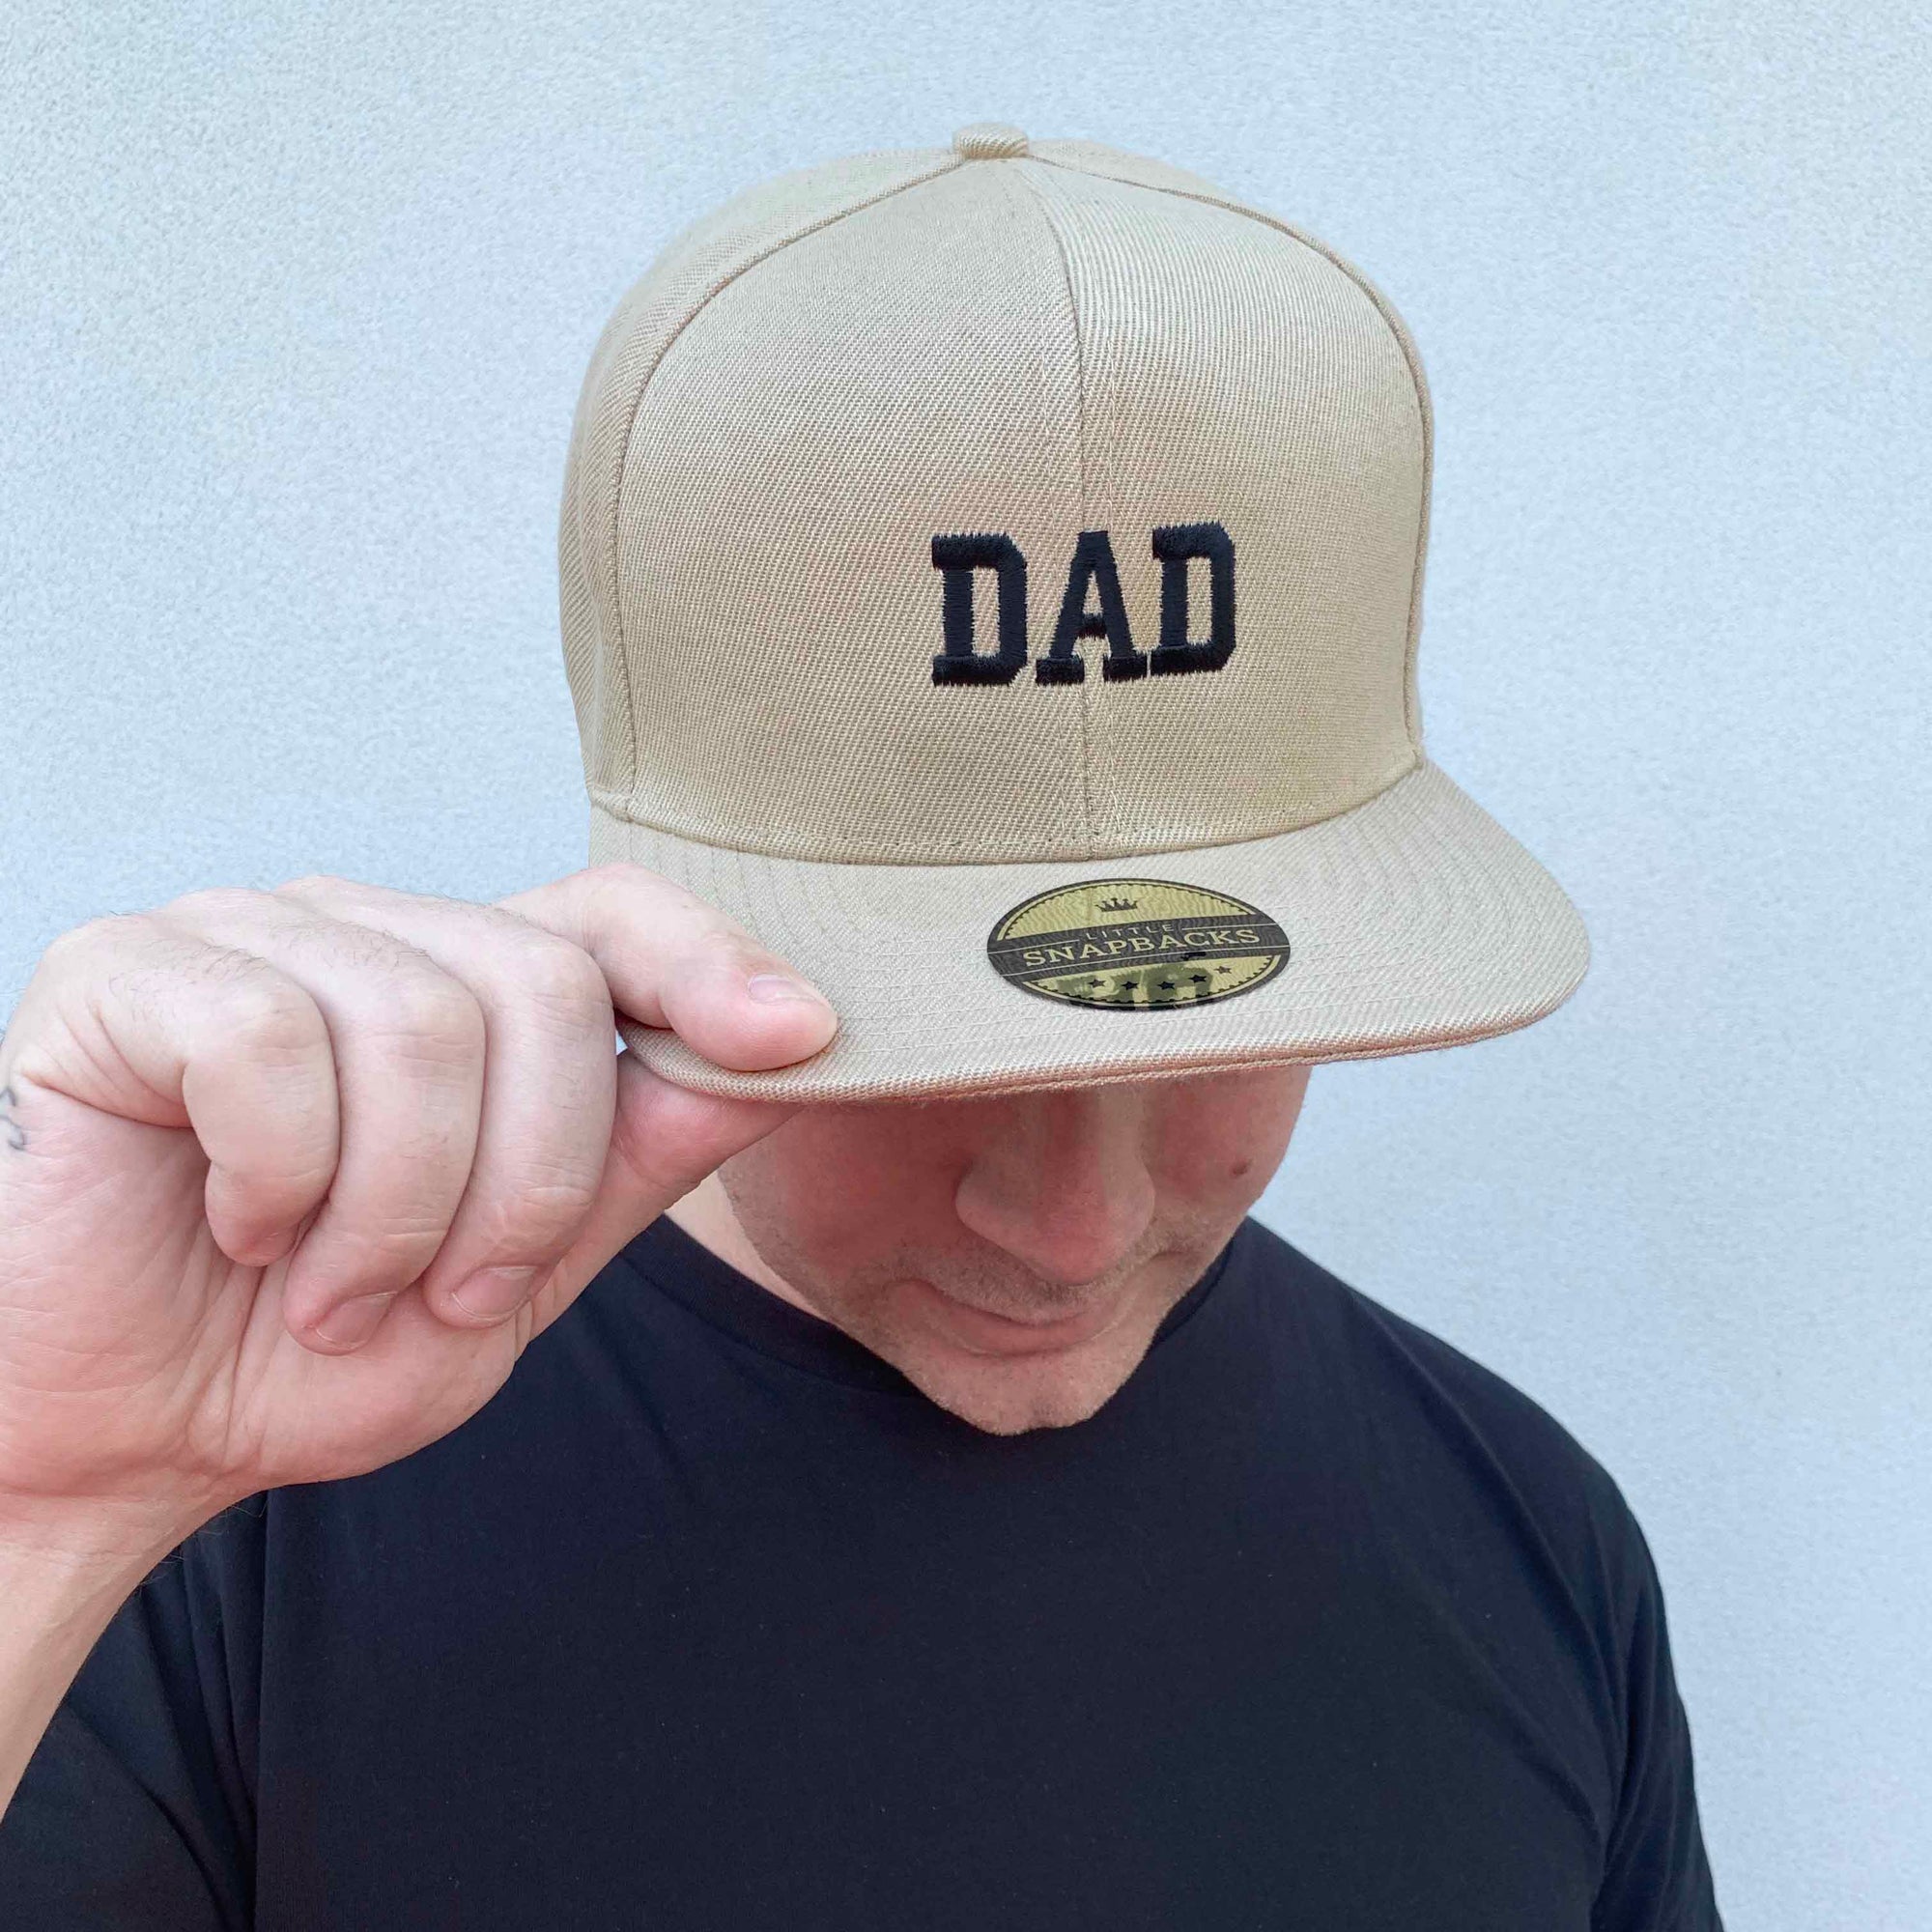 Matching Adult Father's Day Range - Personalised Dad Hat